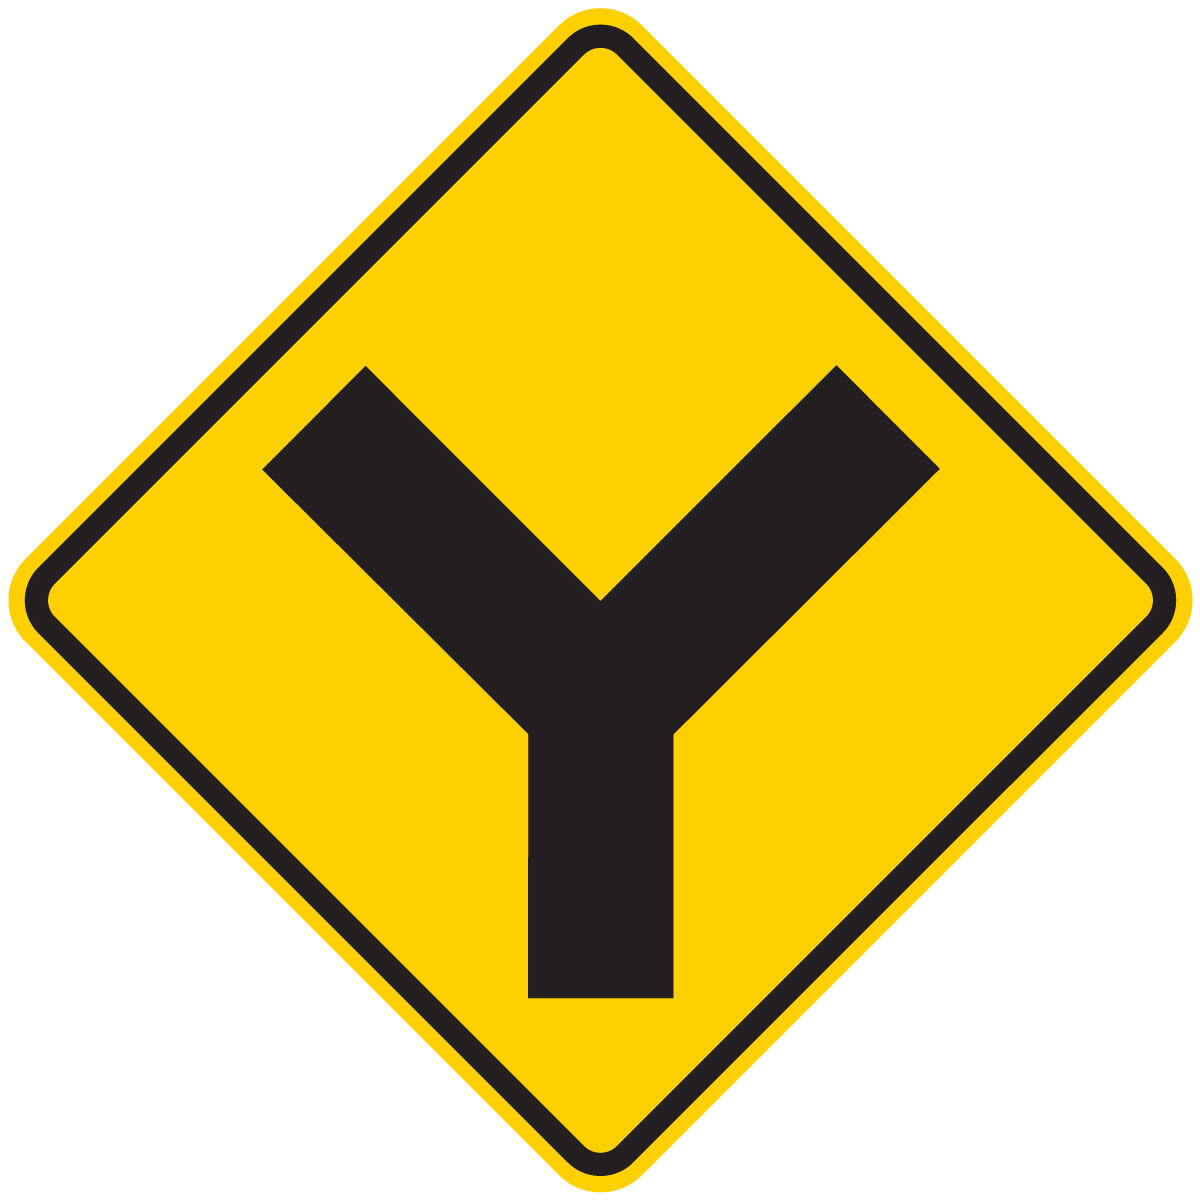 W2-5 Y Intersection